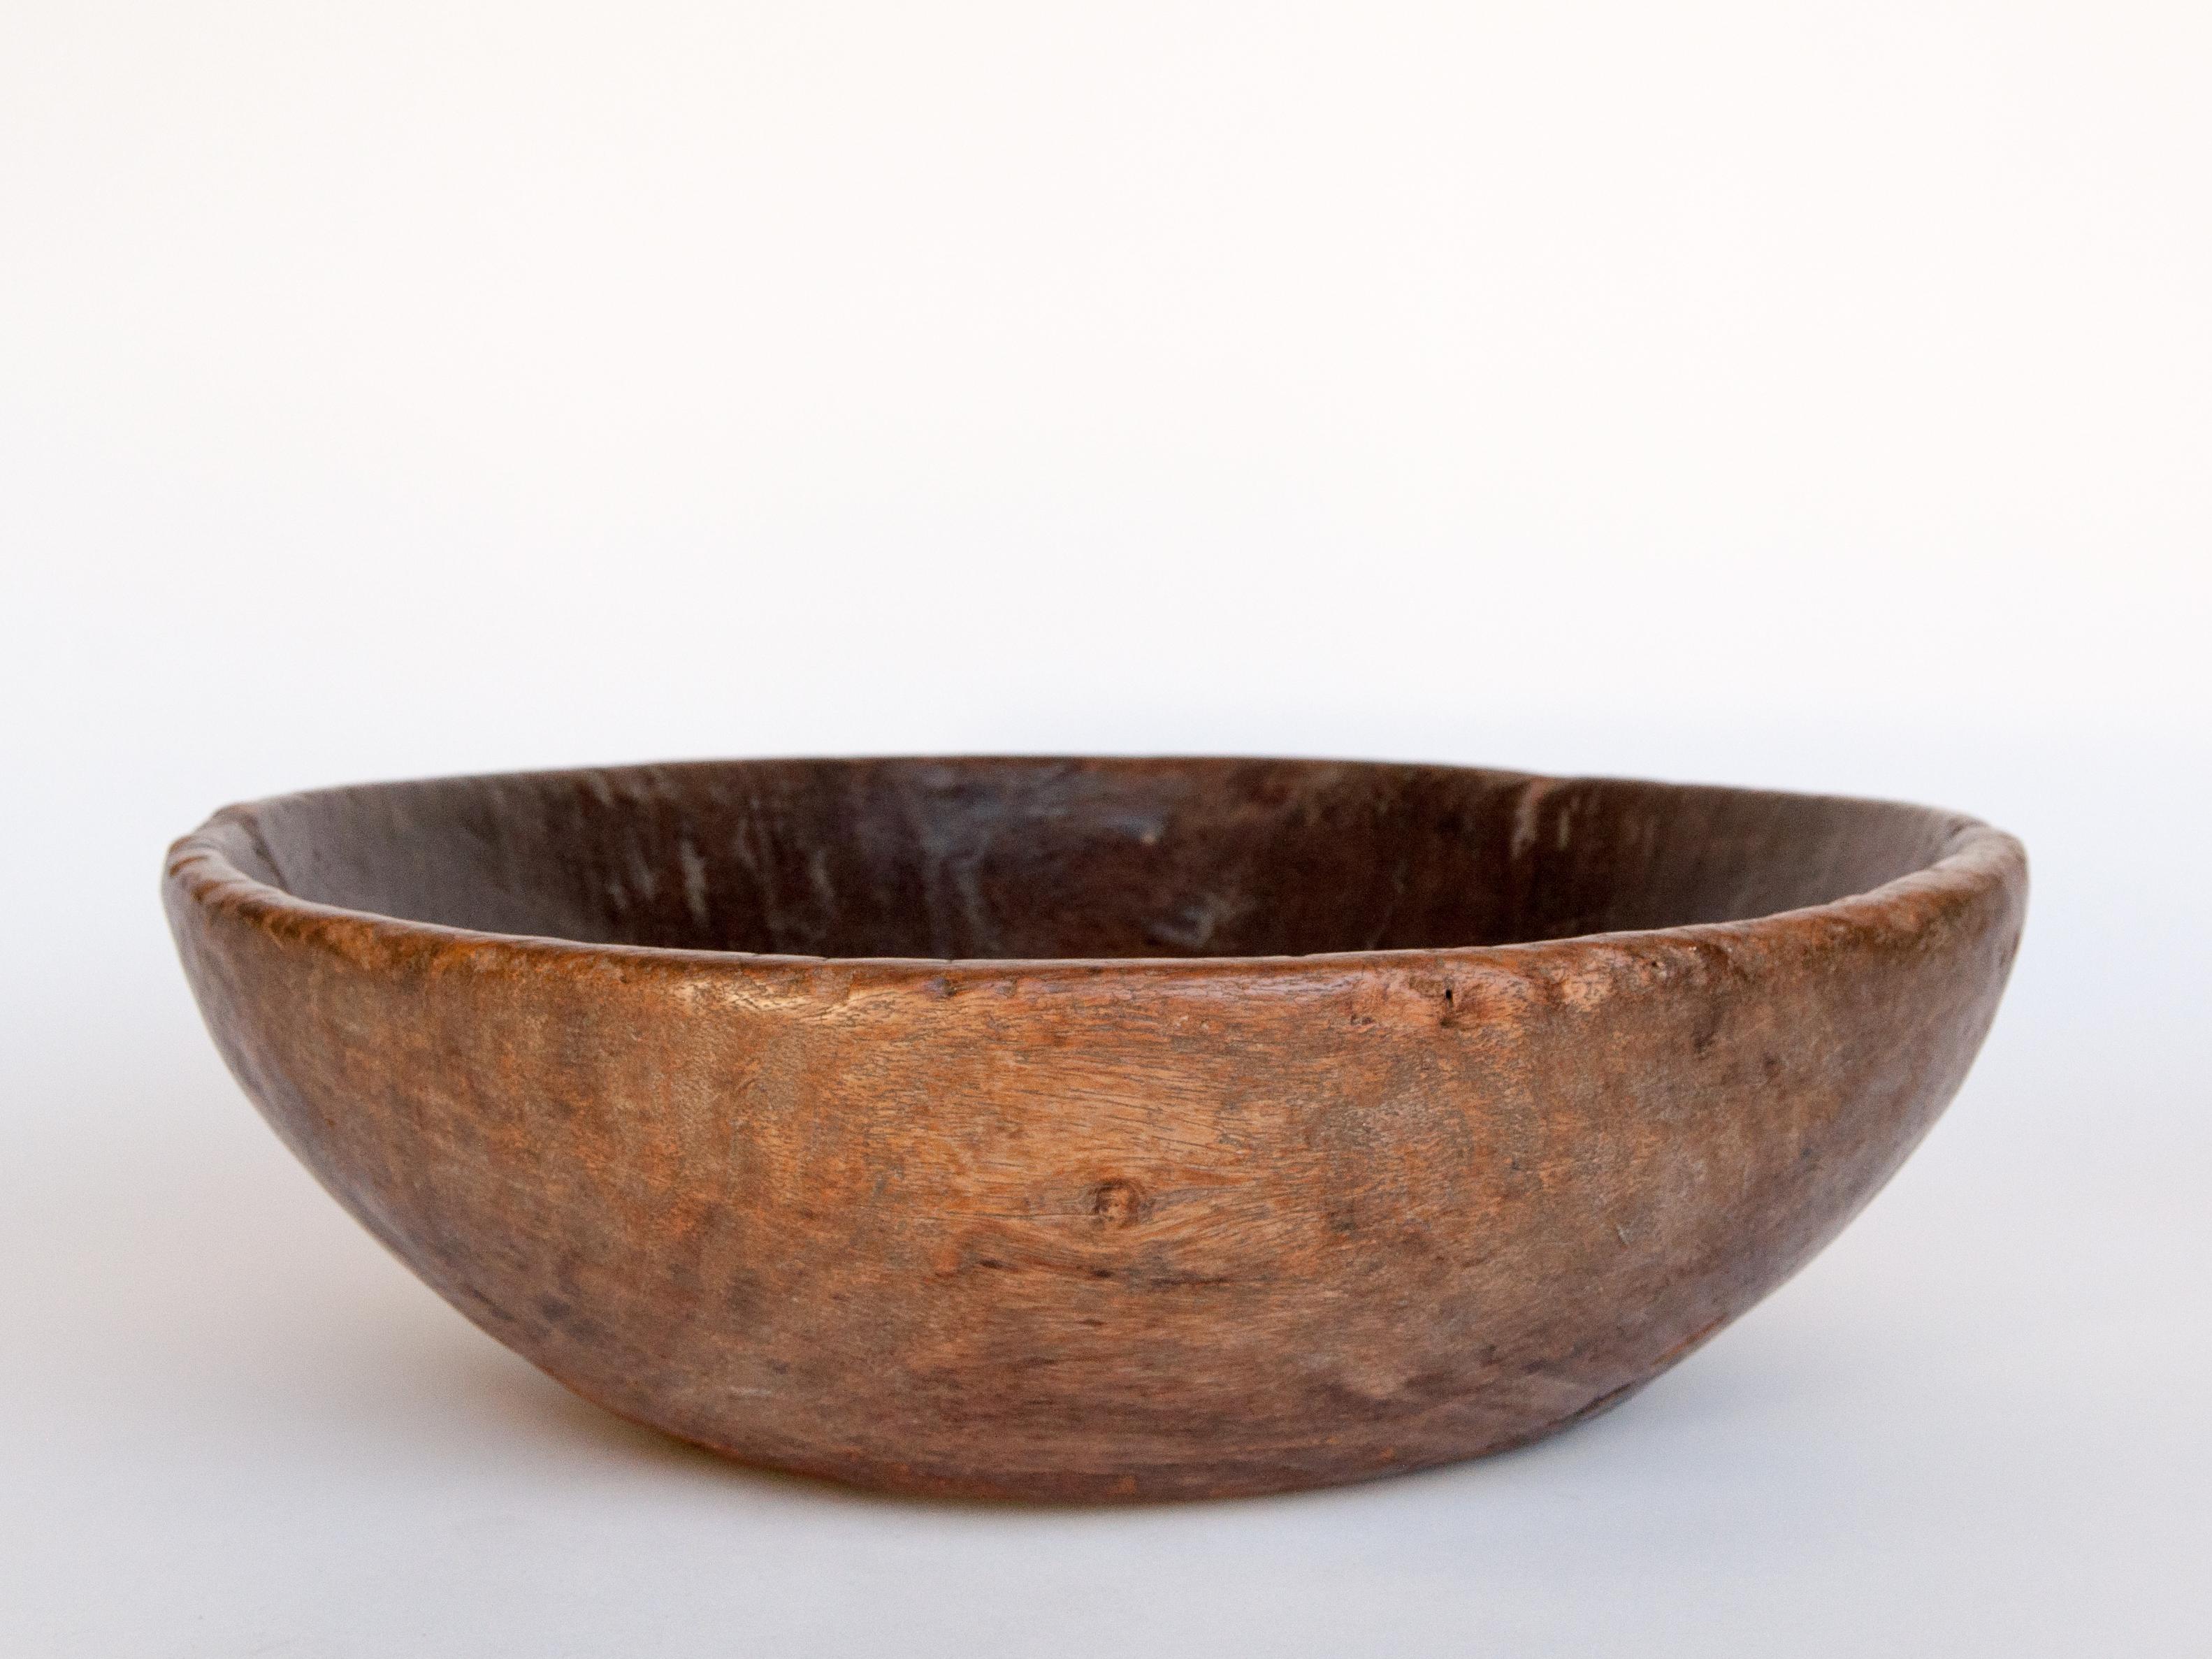 Nepalese Old Rustic Wooden Bowl from the Nepal Himal, Mid-20th Century